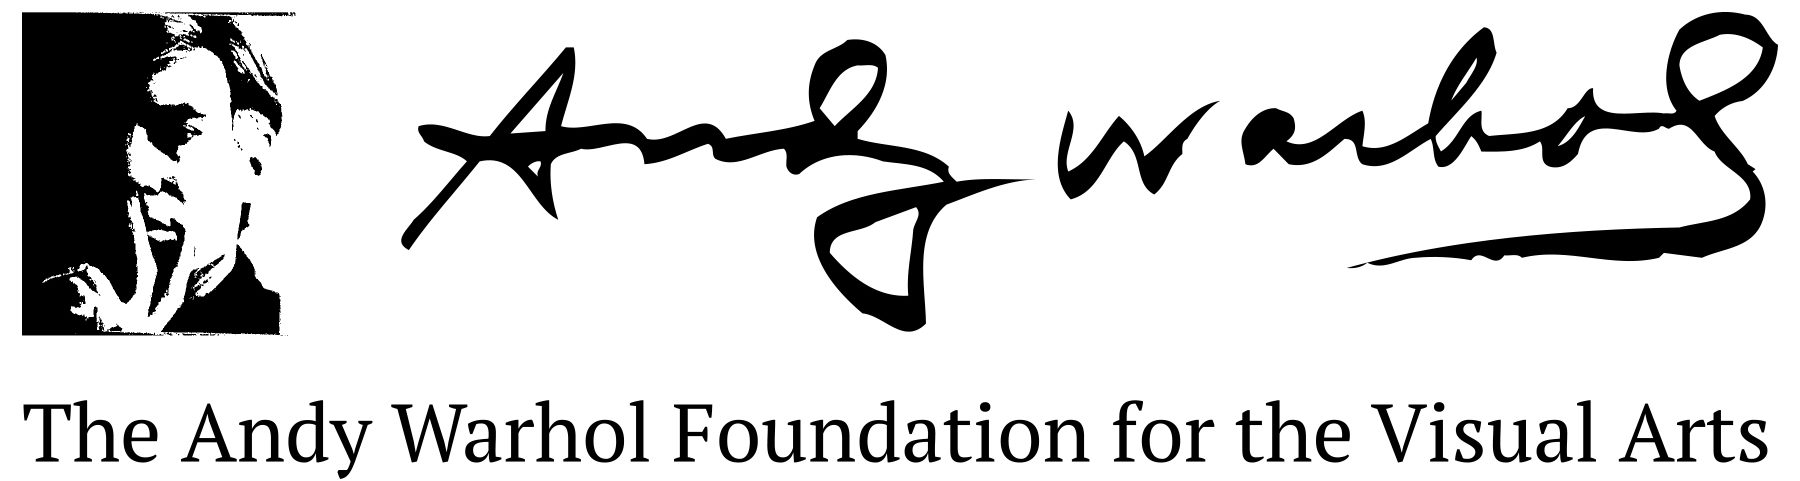 The Andy Warhol Foundation for the Visual Arts logo